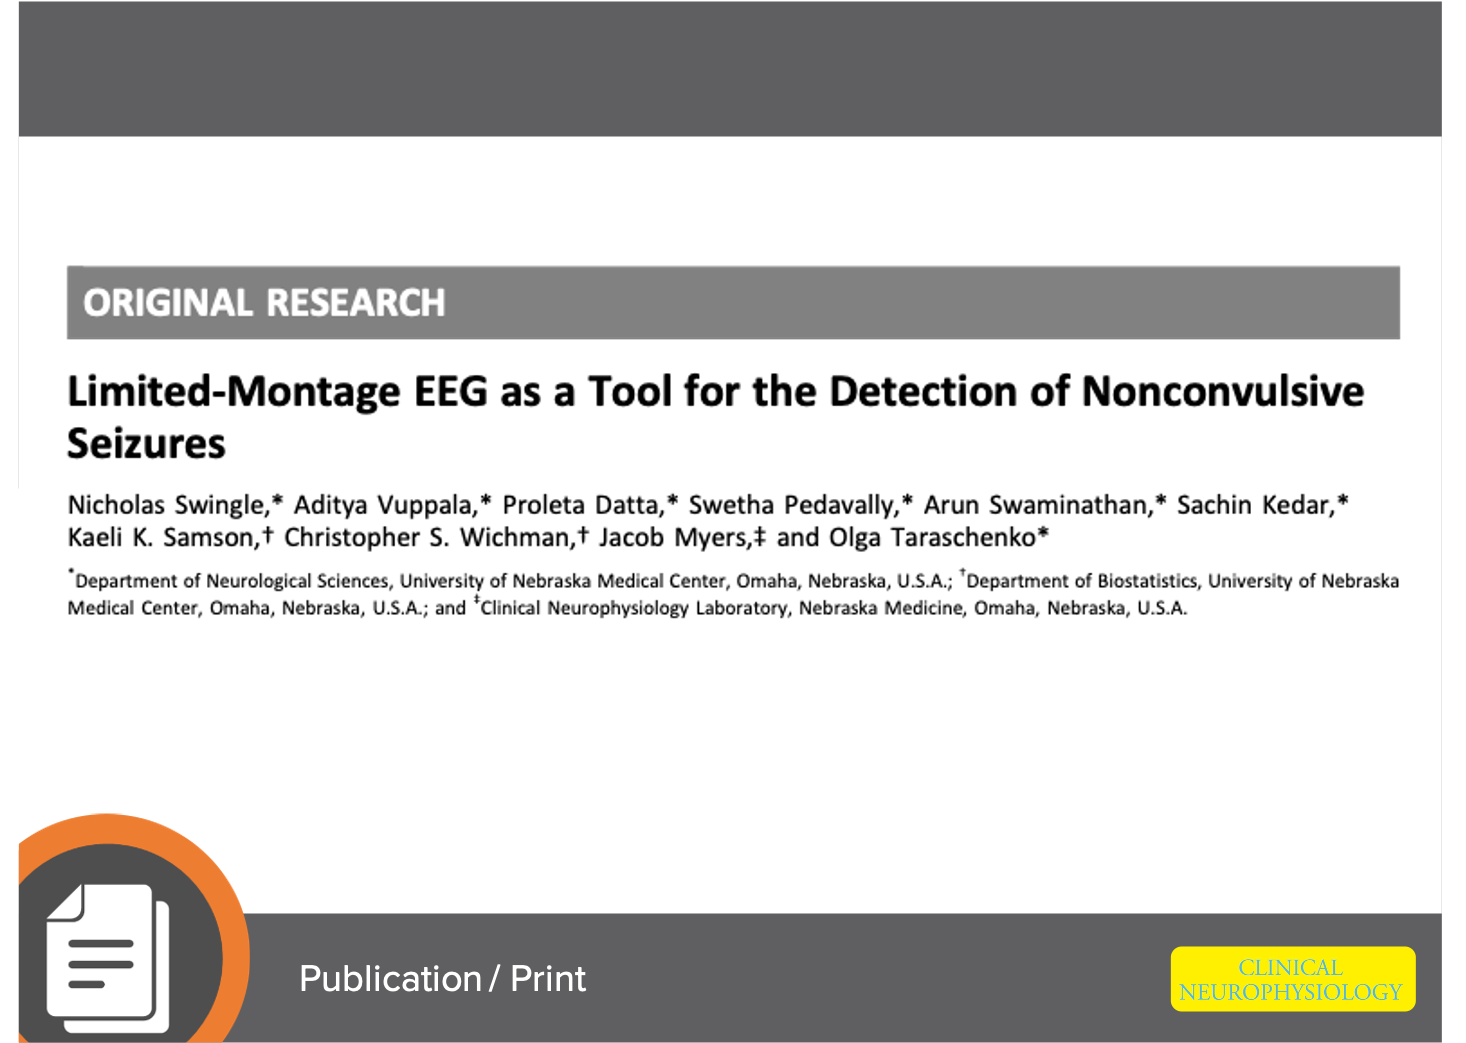 Circumferential Montage Manuscript: Limited-Montage EEG as a Tool for the Detection of Nonconvulsive Seizures